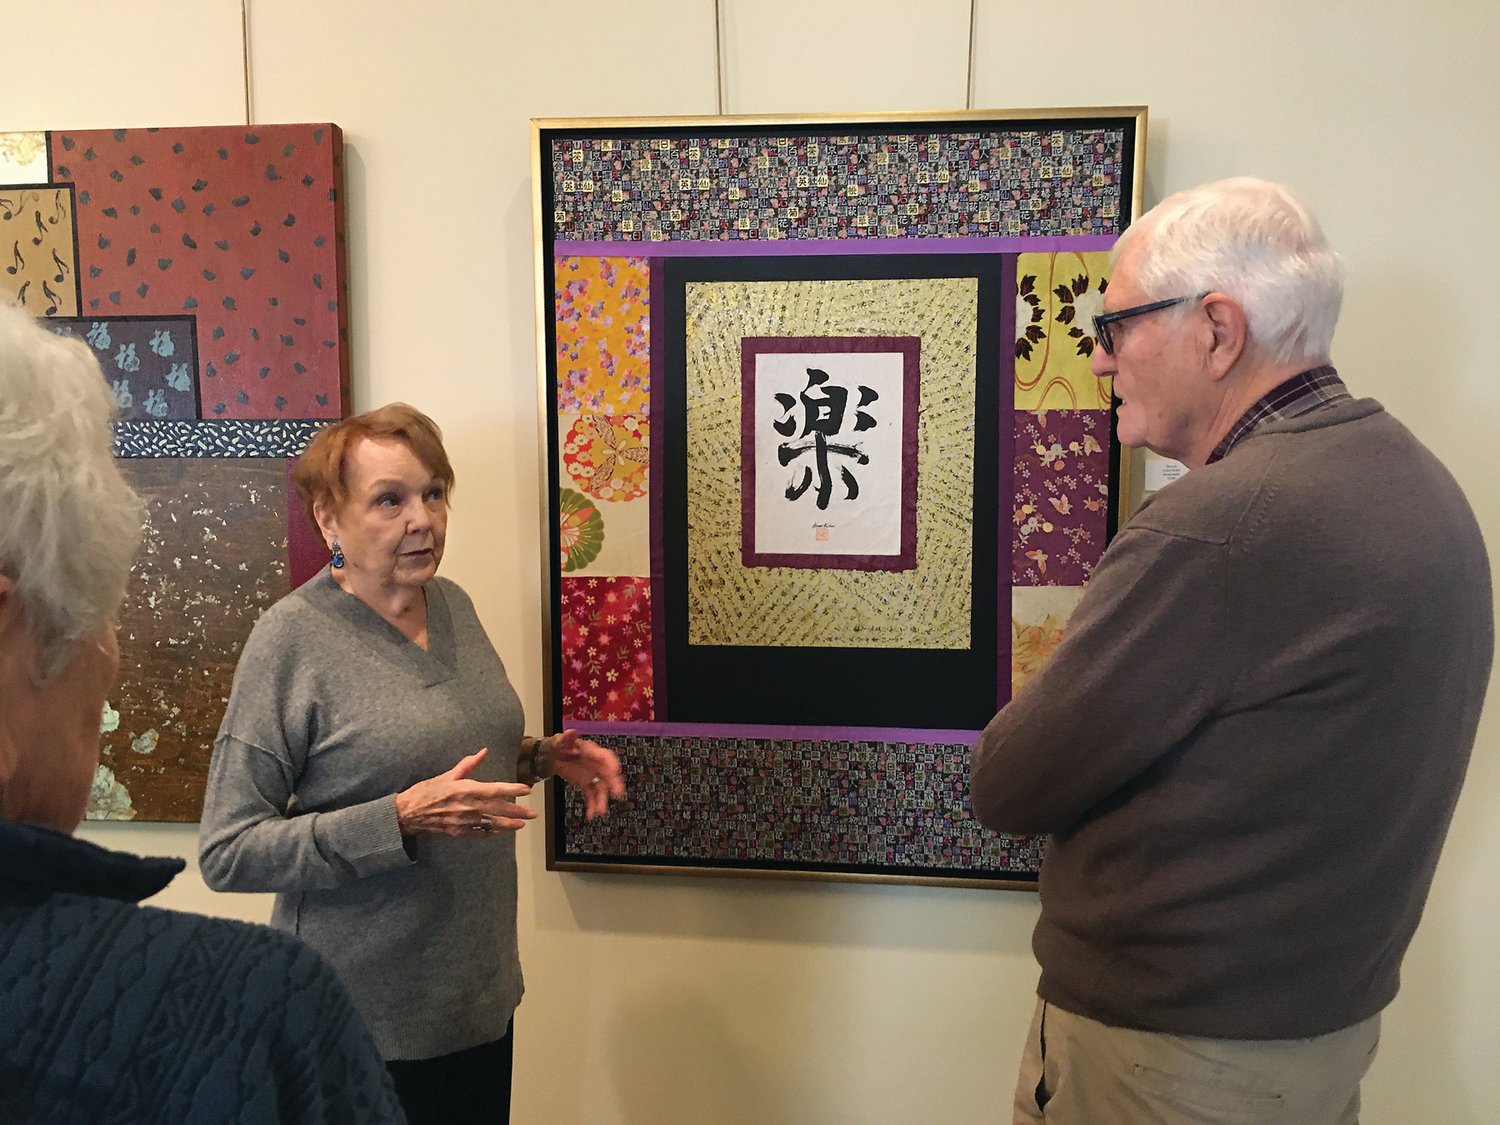 Armor Keller talks to a visitor during a recent showing of her artwork.